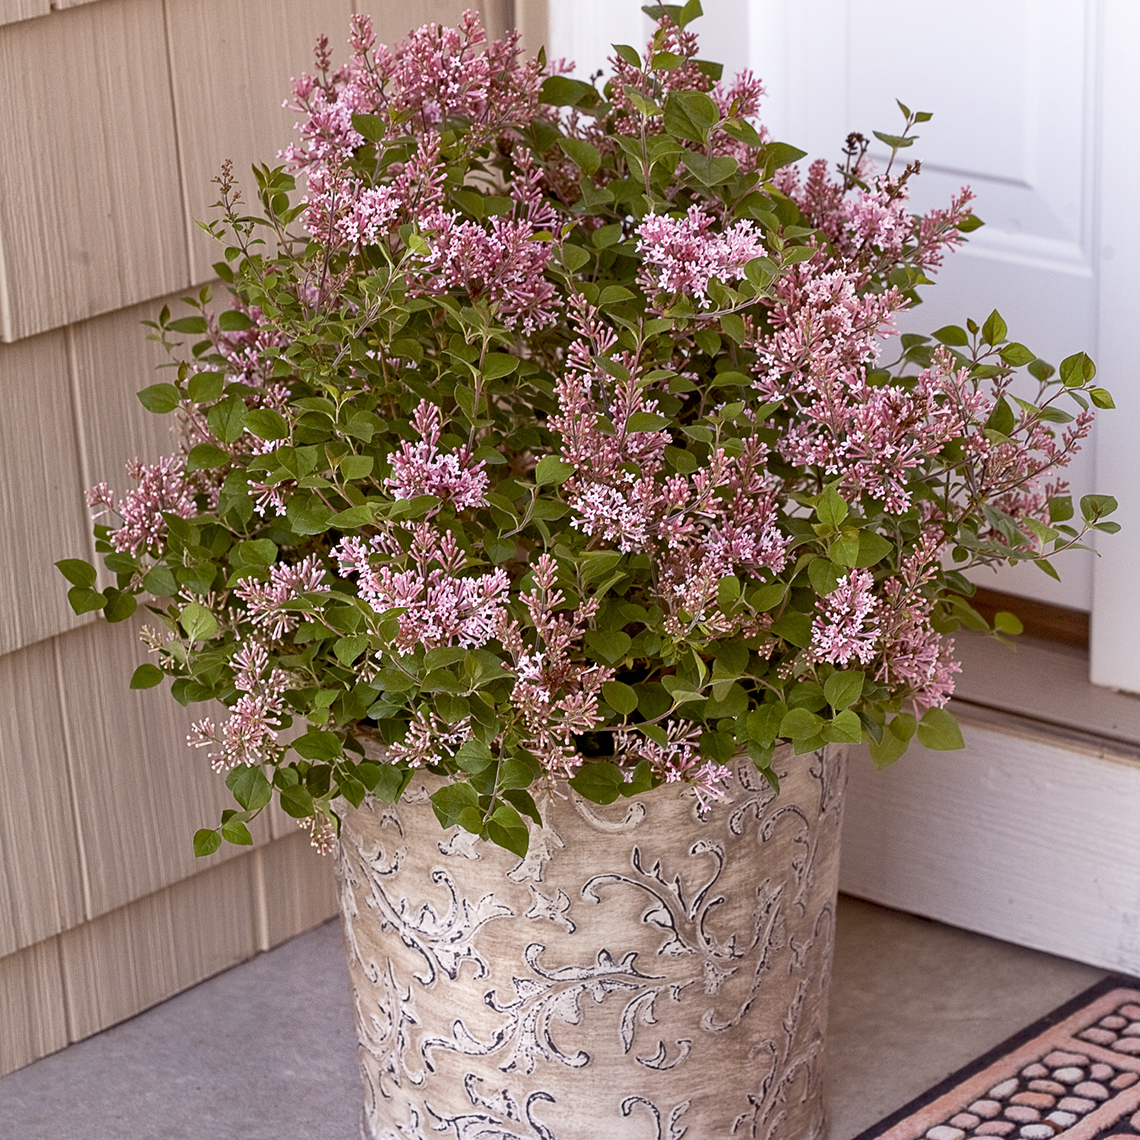 Bloomerang Pink Perfume reblooming lilac in a decorative pot on a porch